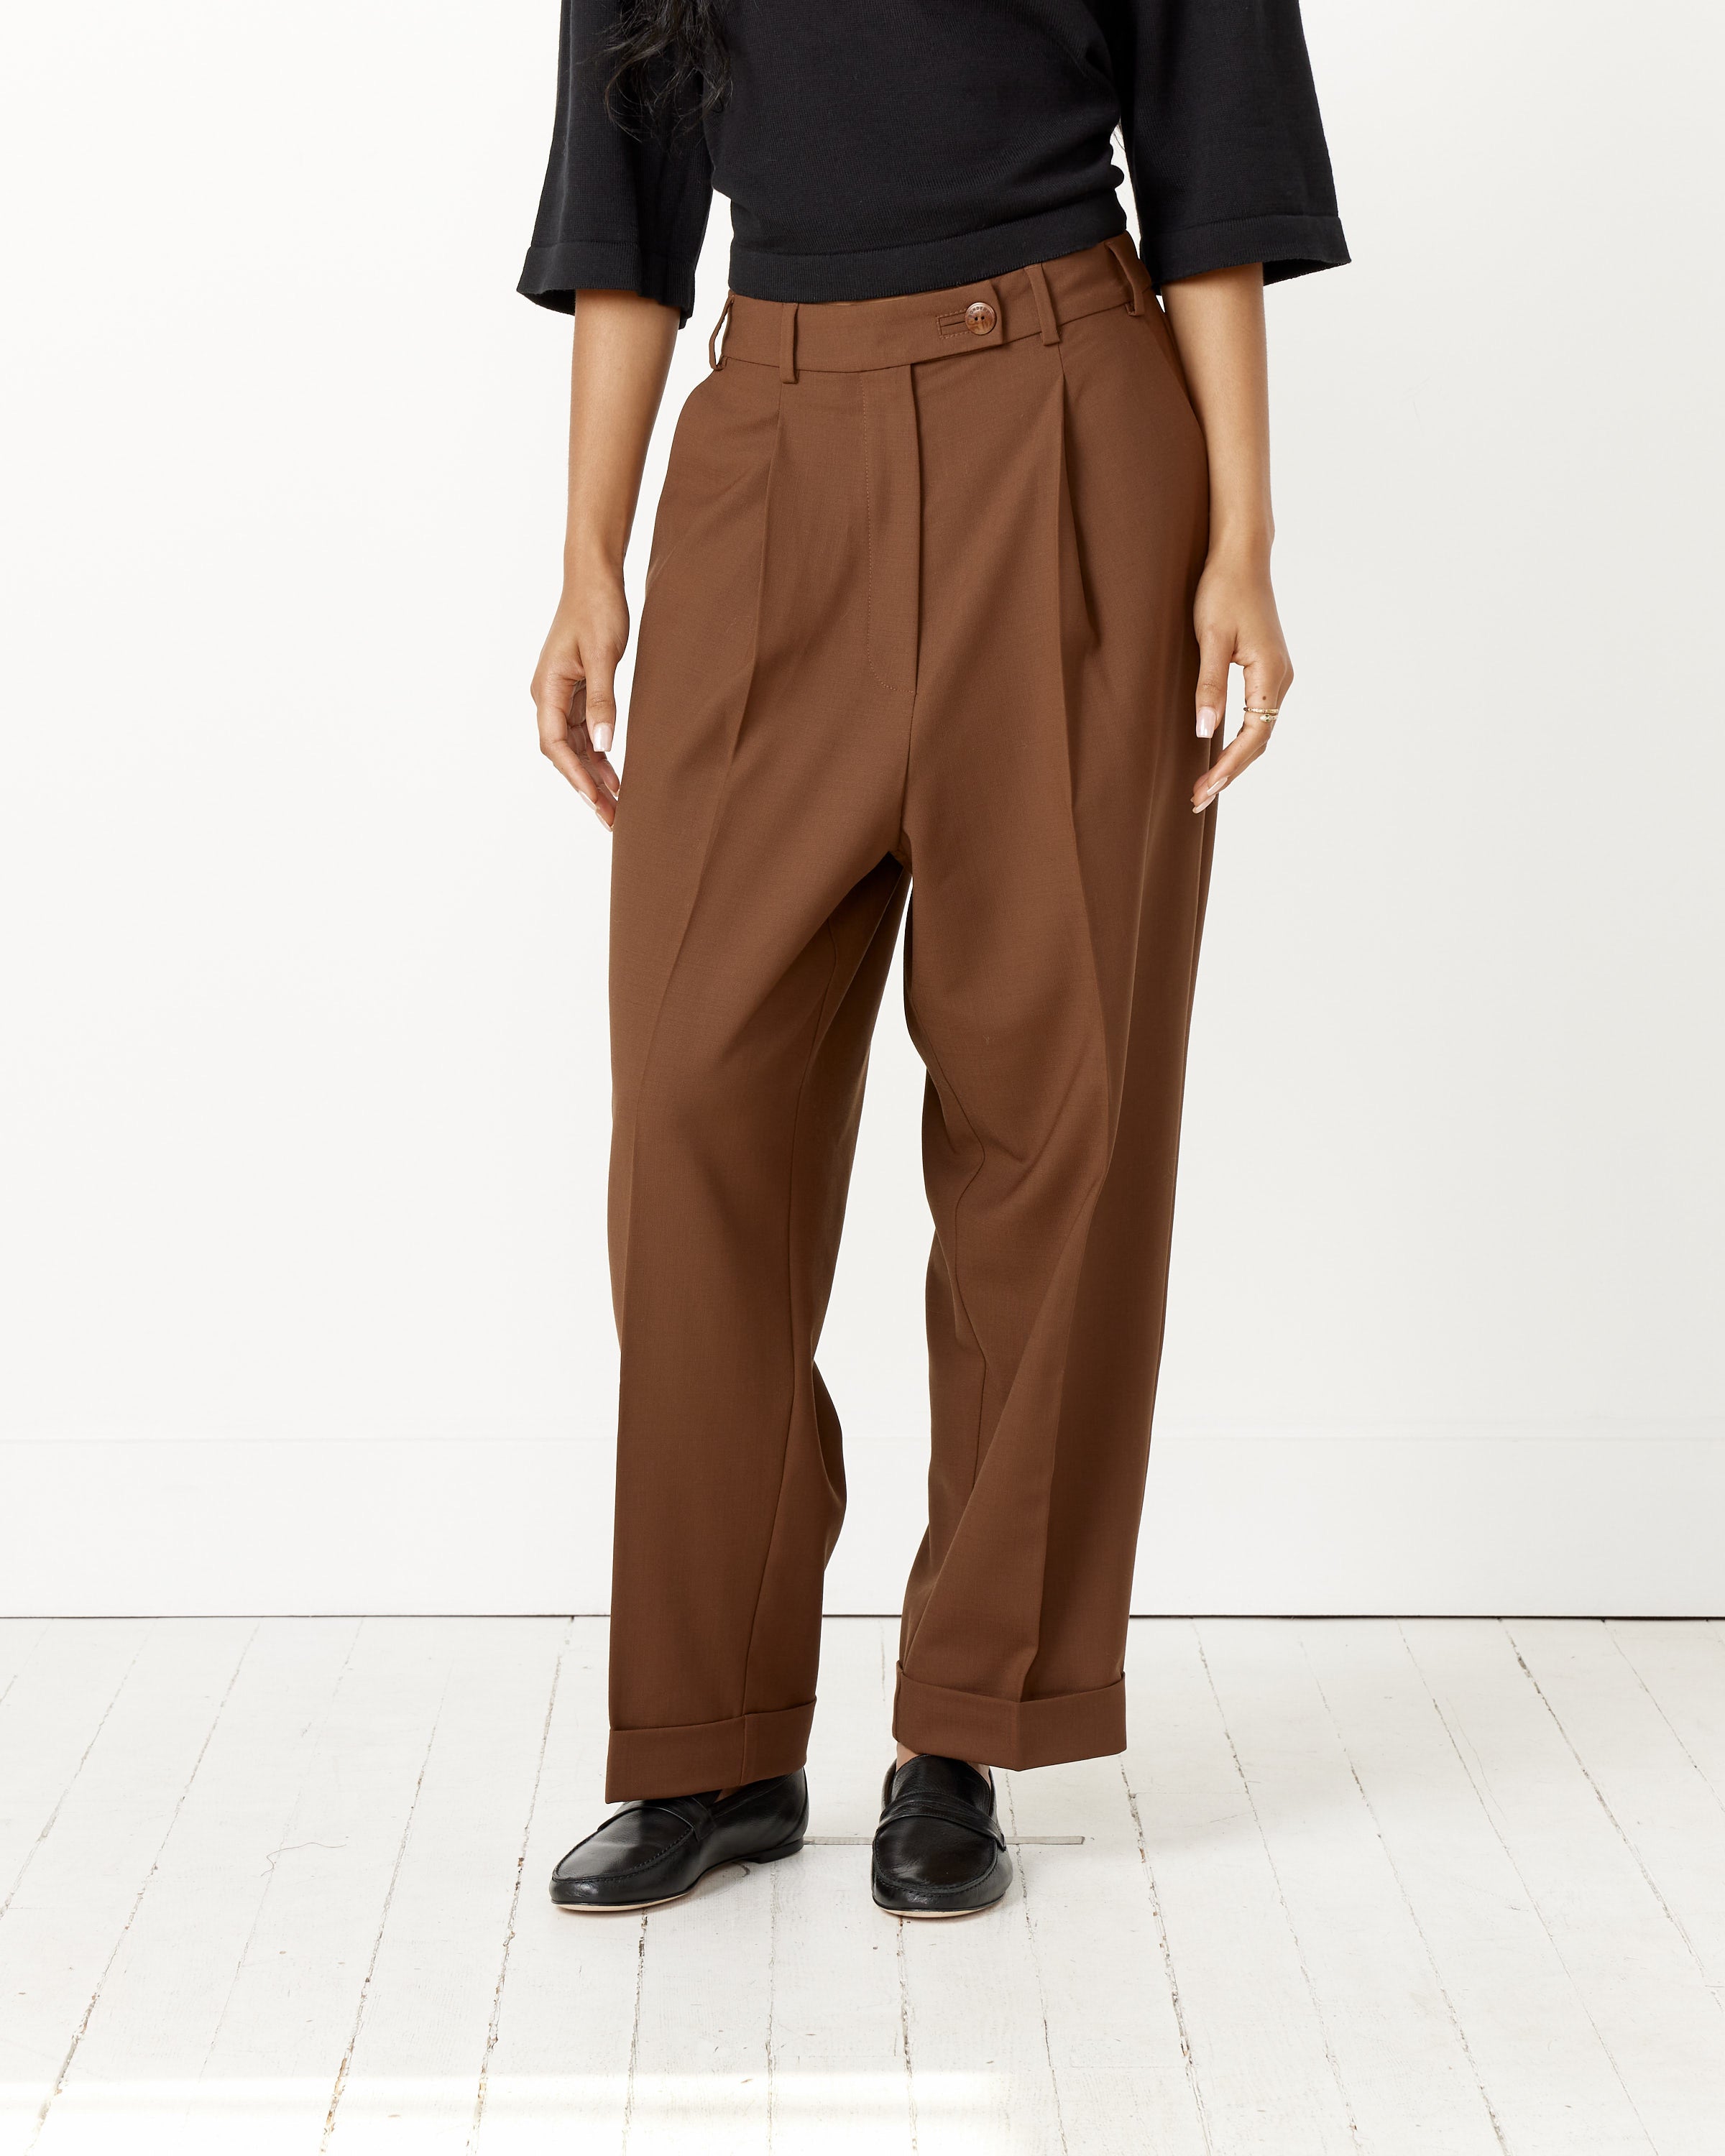 Tailoring Masculine Pant